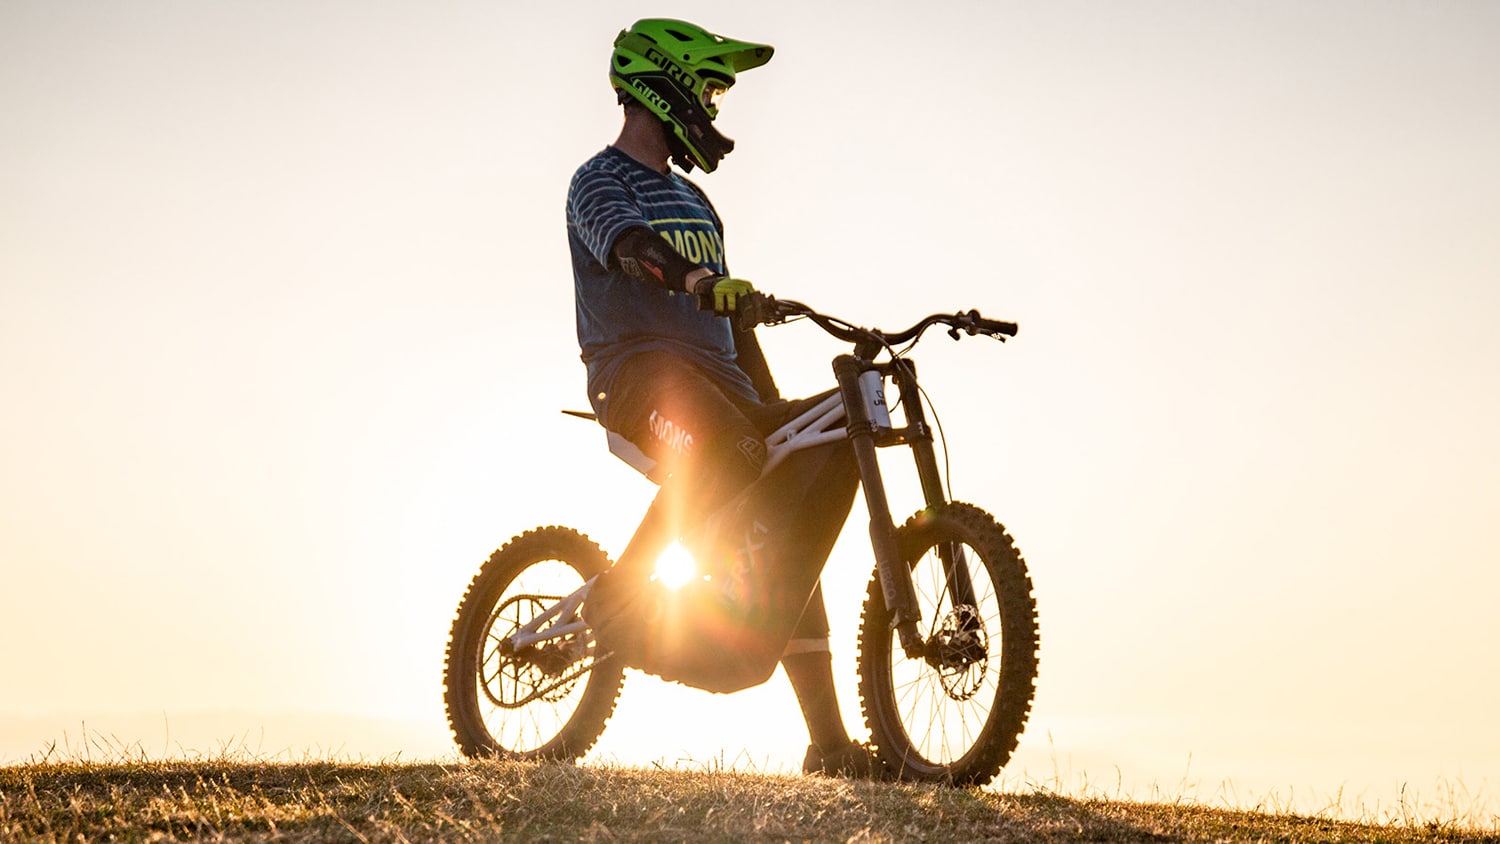 The FRX1 Electric Trail Bike built for off-road riding